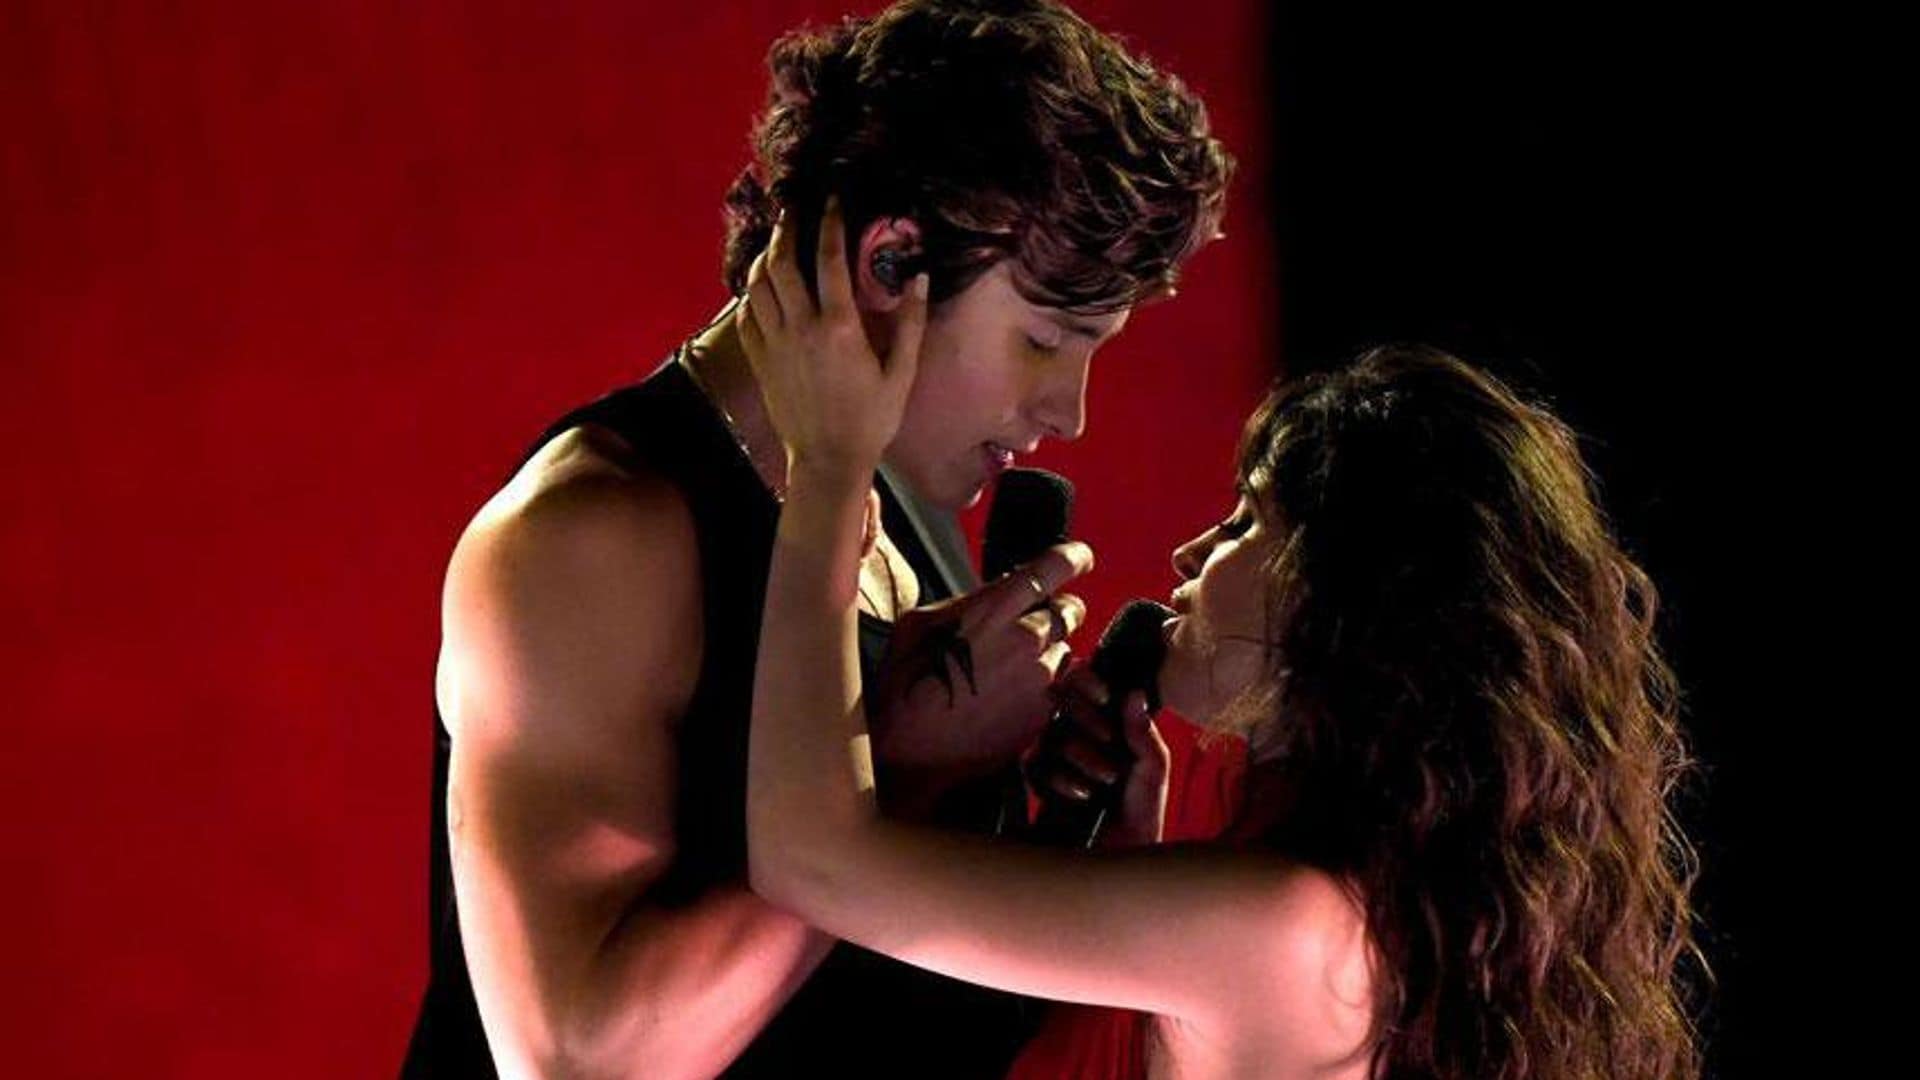 Camila Cabello responds to fan's opinion about her PDA with Shawn Mendes